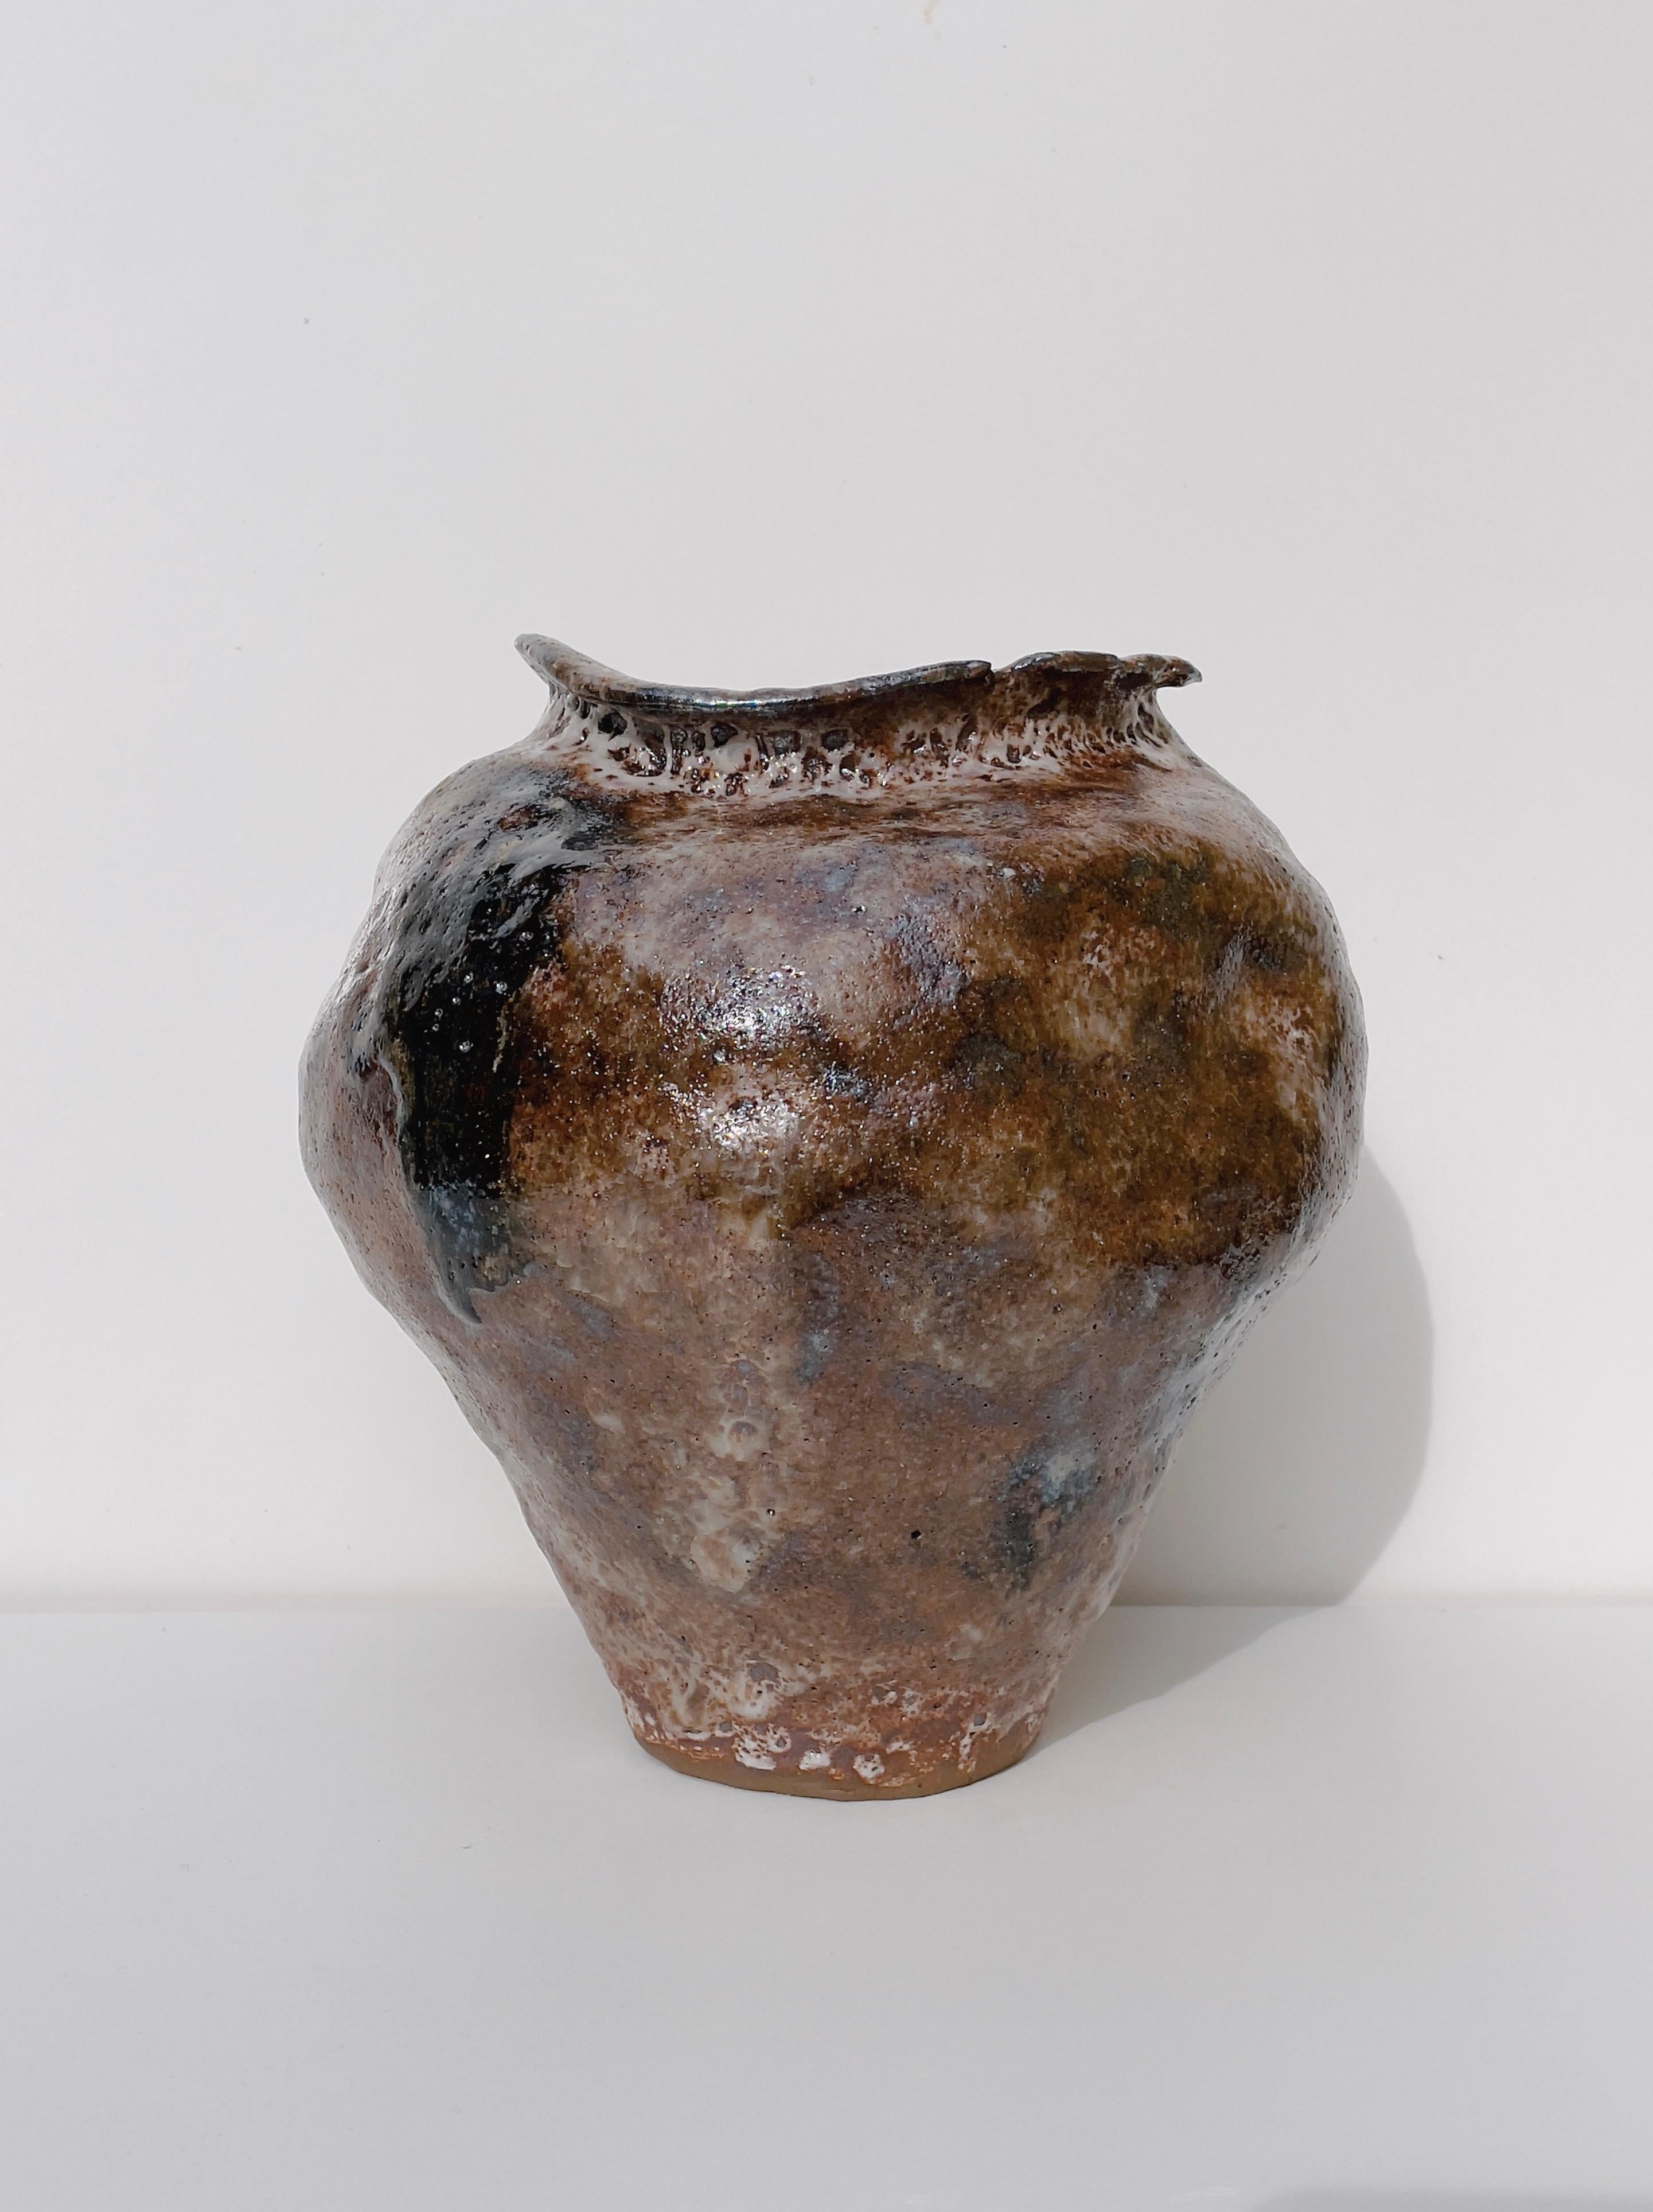 Brown rituals vase by Lisa Geue
Dimensions: D 24 x W 22 x H 22,5 cm
Materials: Terracotta, Shino glazes, Soda, shell remnants.
Non-functional.

By researching ancient and indigenous rites, practices, and rituals, Geue observes the meaning of